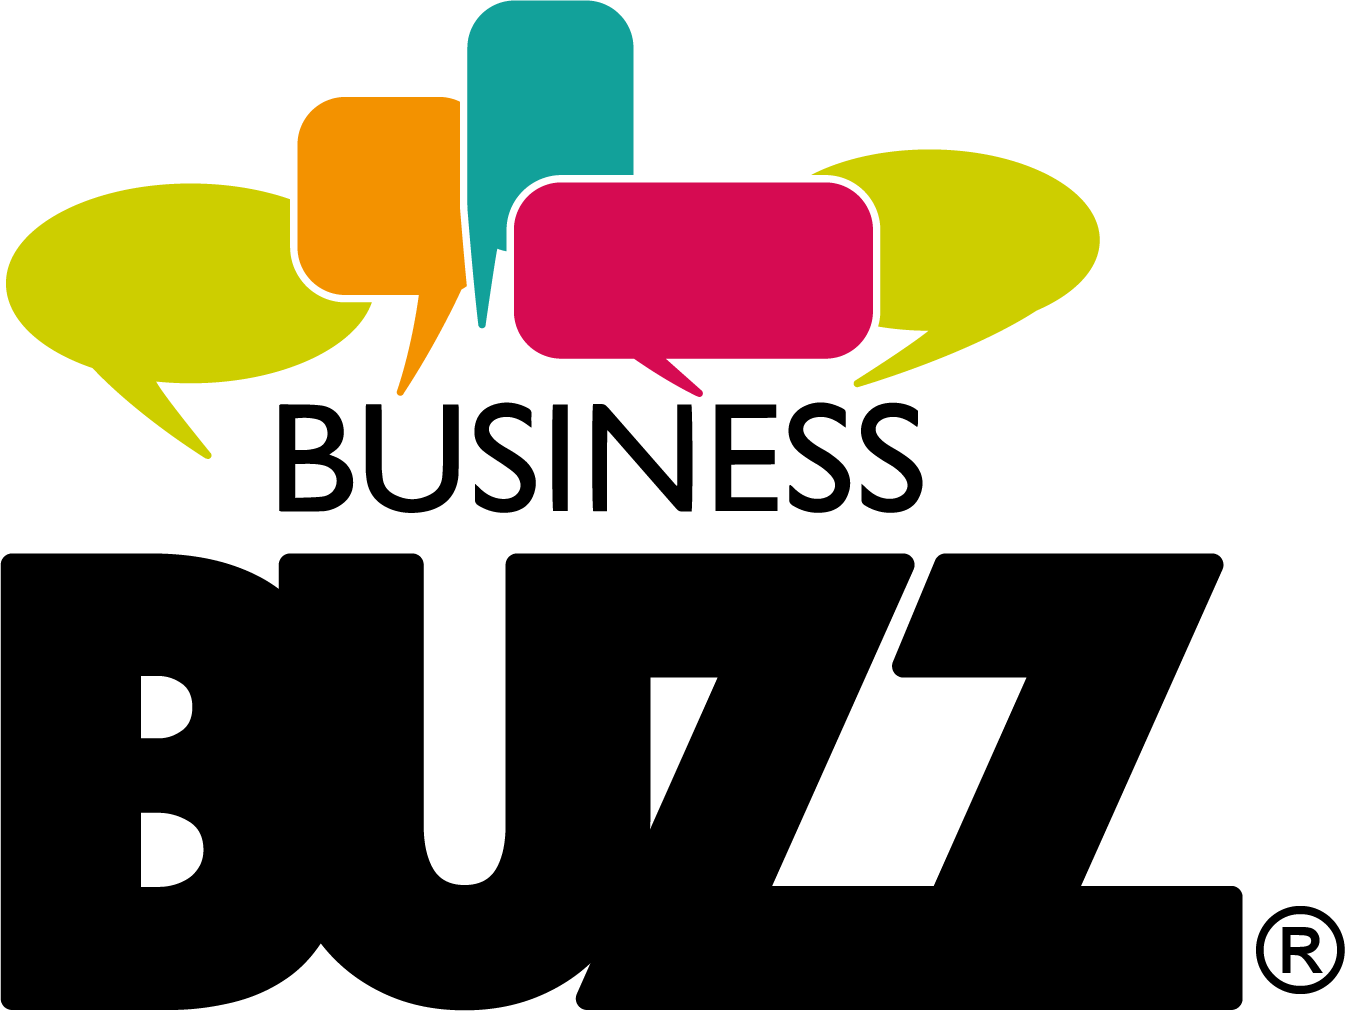 Business Buzz Networking